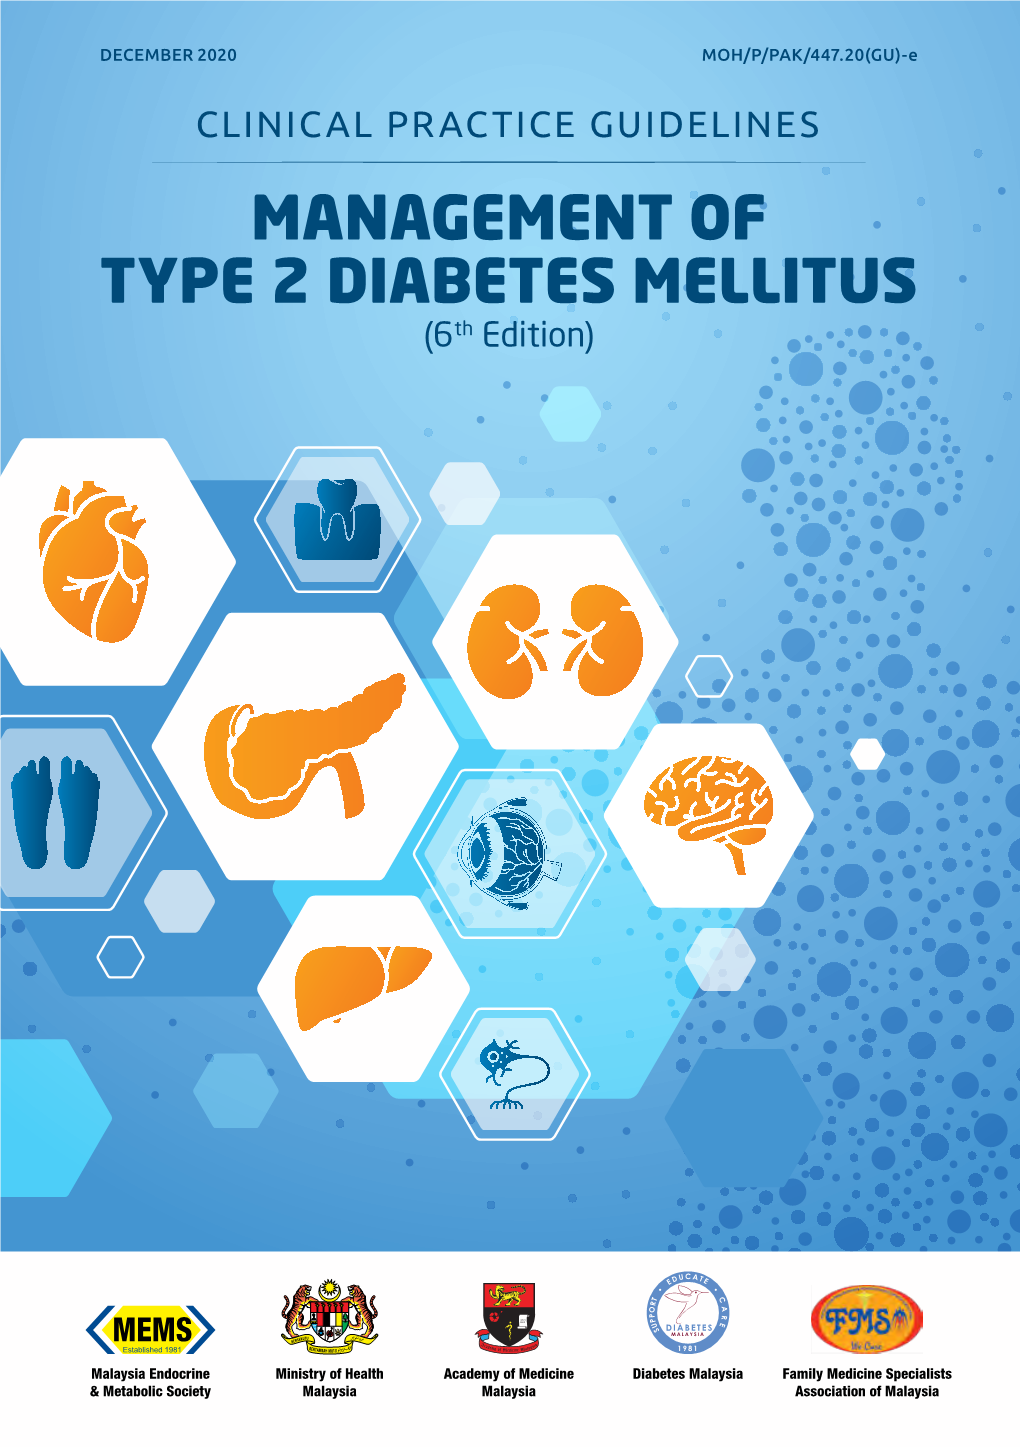 CPG – Management of Type 2 Diabetes